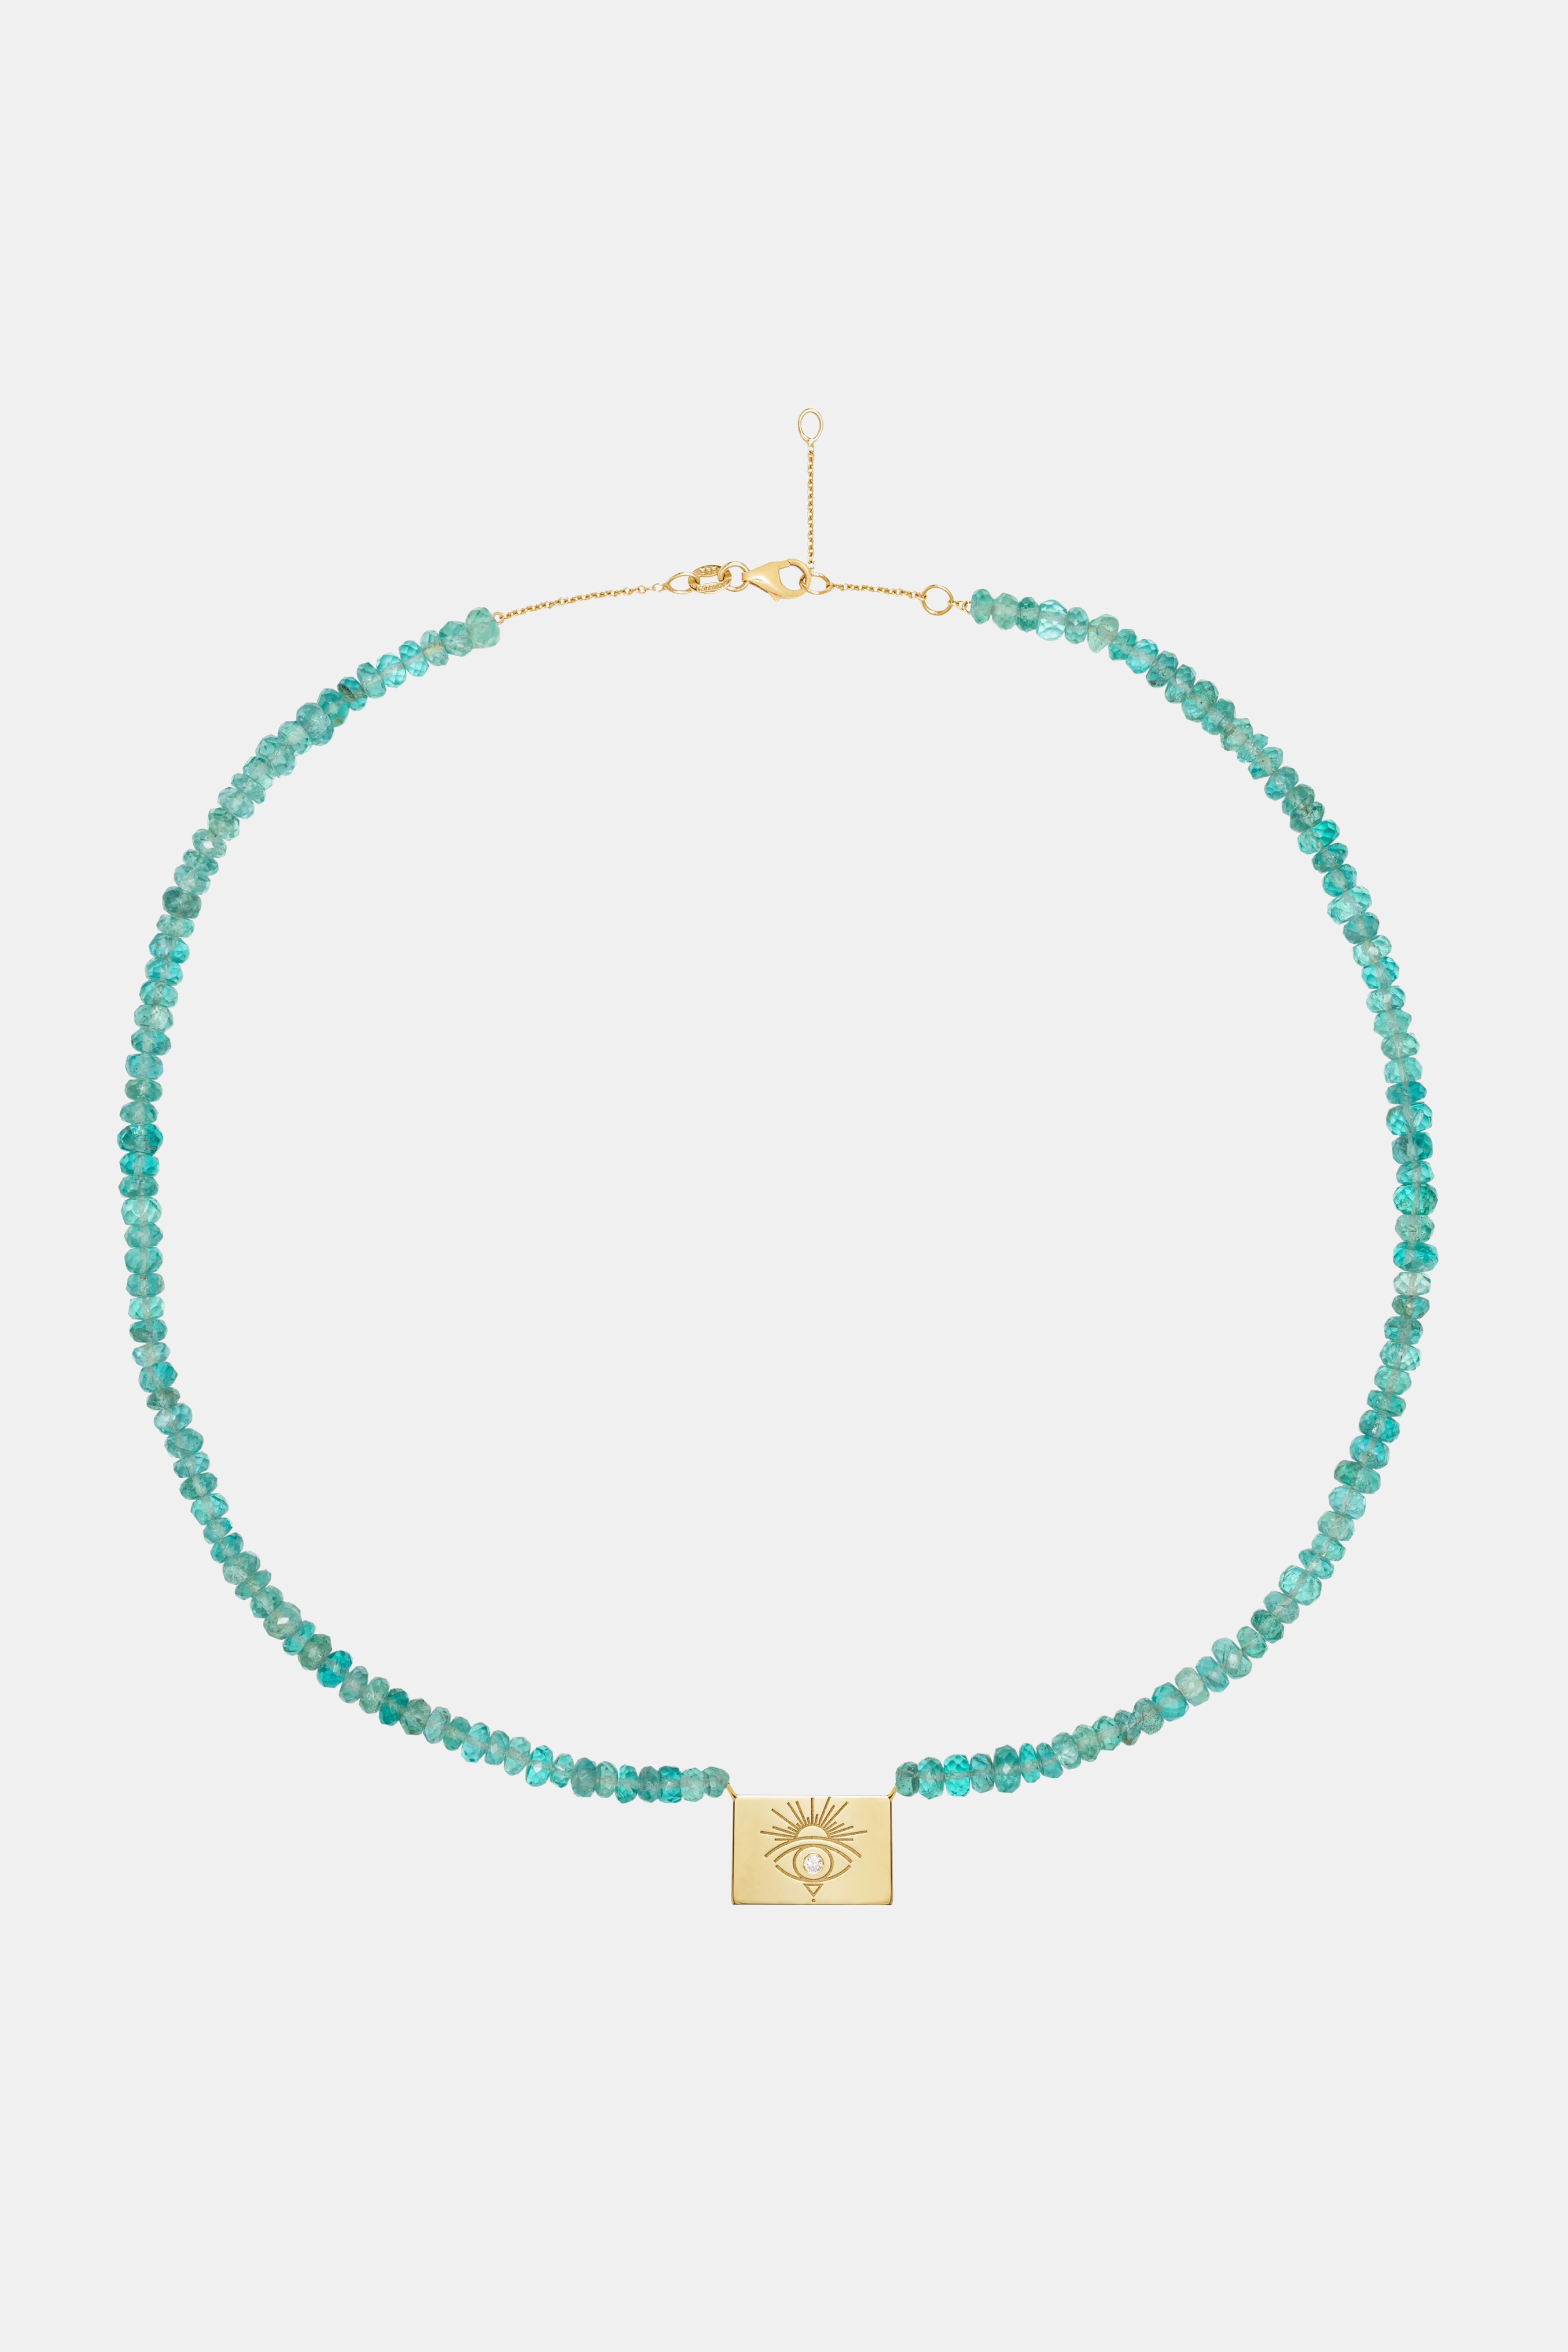 Apatite Beaded Necklace With Rectangle Sunset Eye